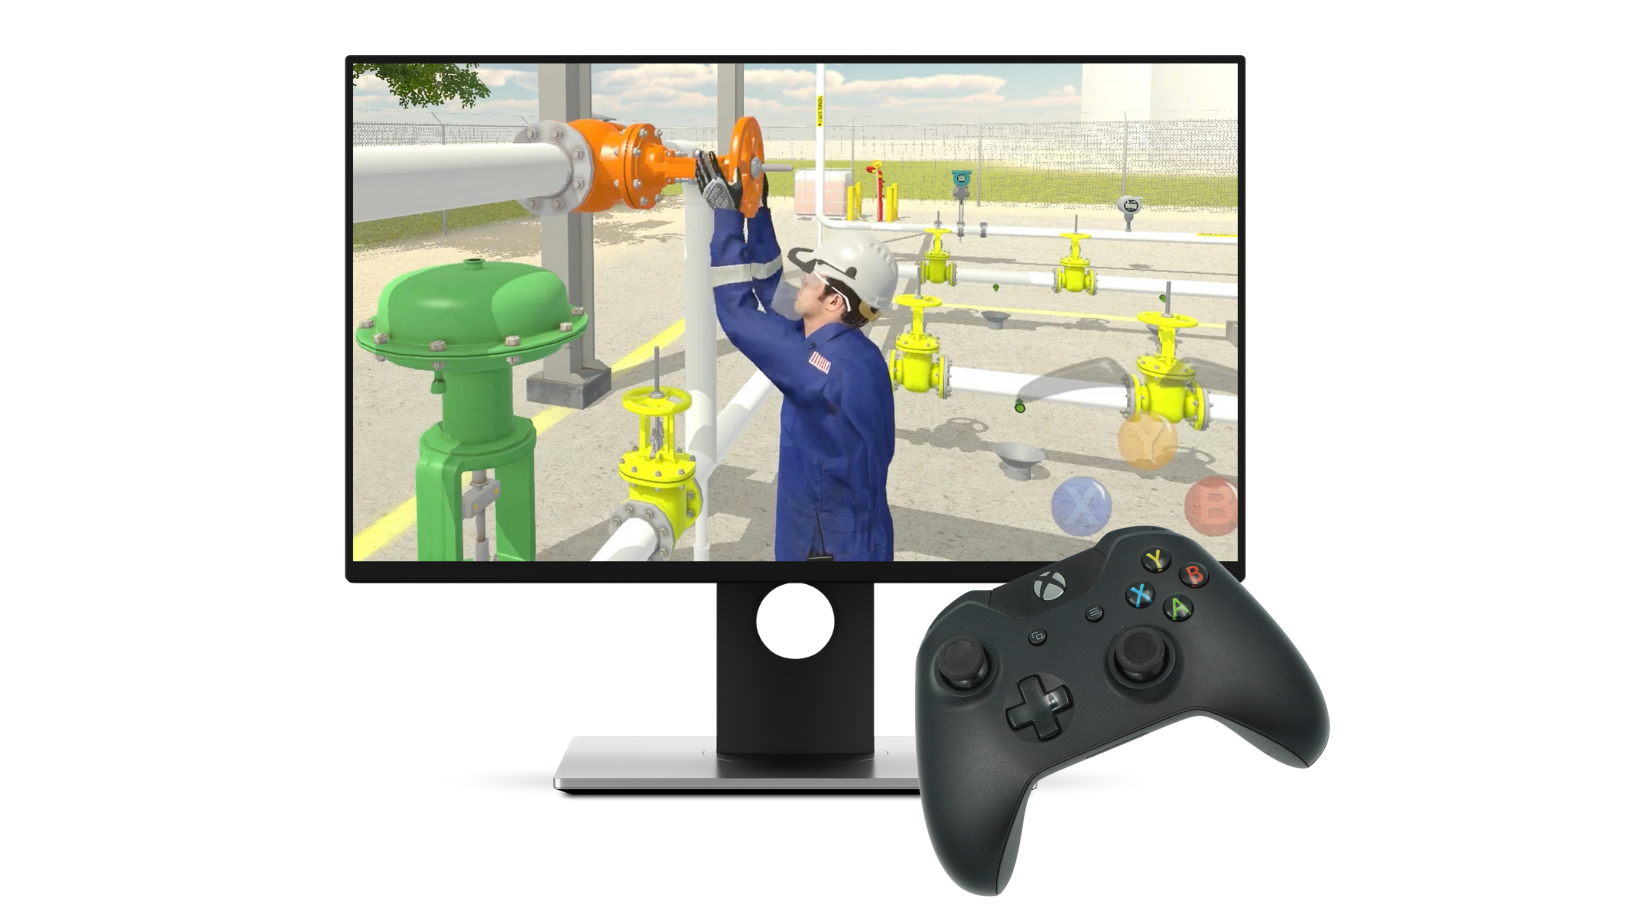 Learn lockout tagout procedures through 3D game engine technology used in LOTO EXP.